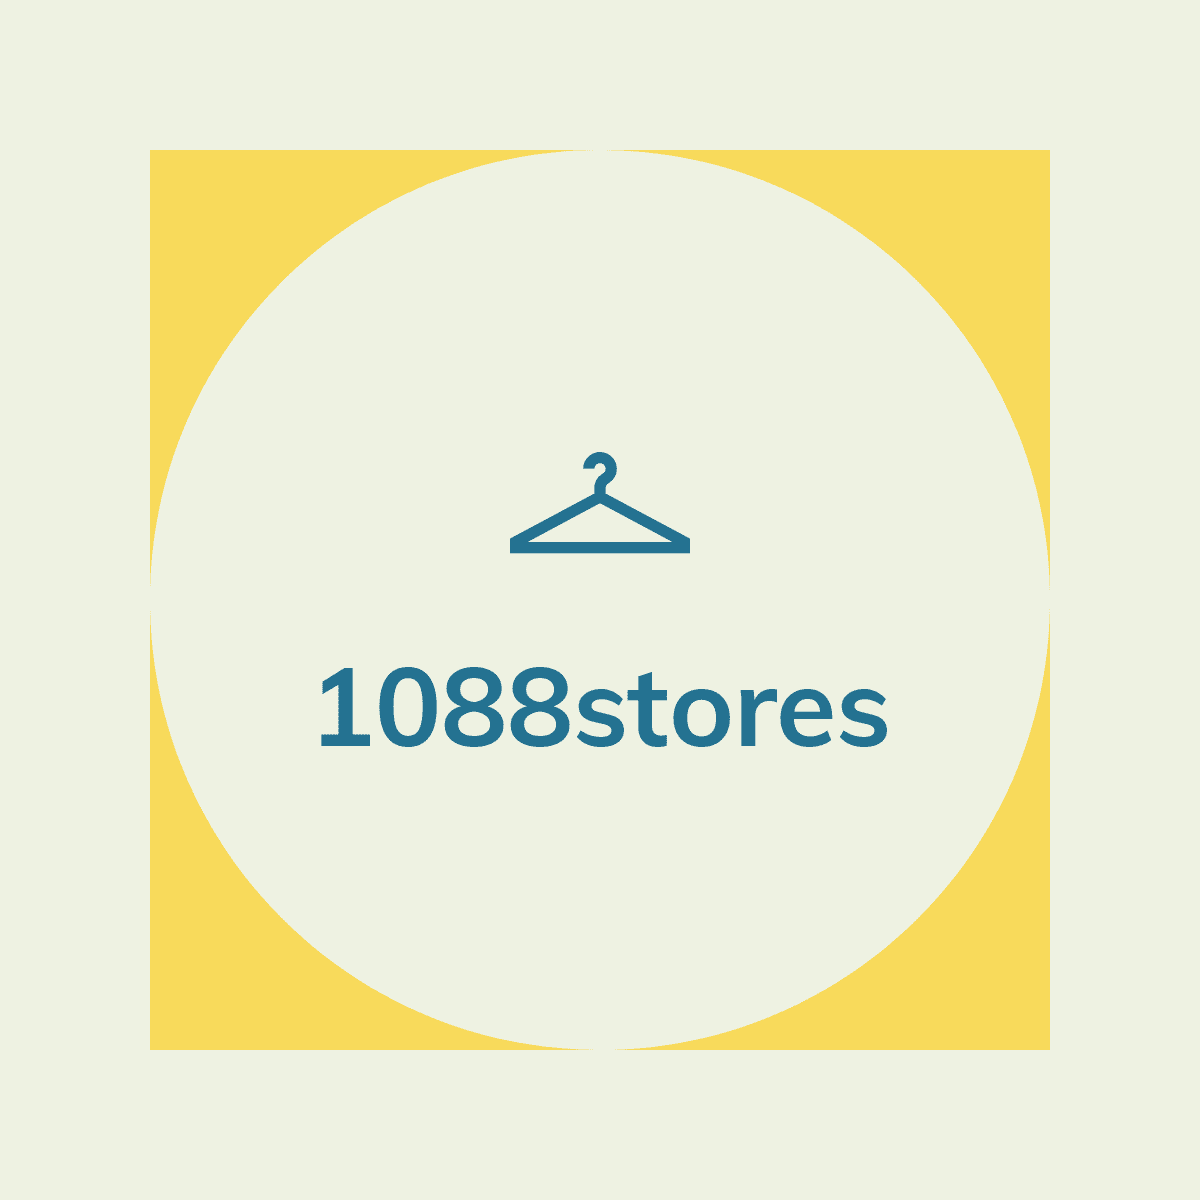 1088stores